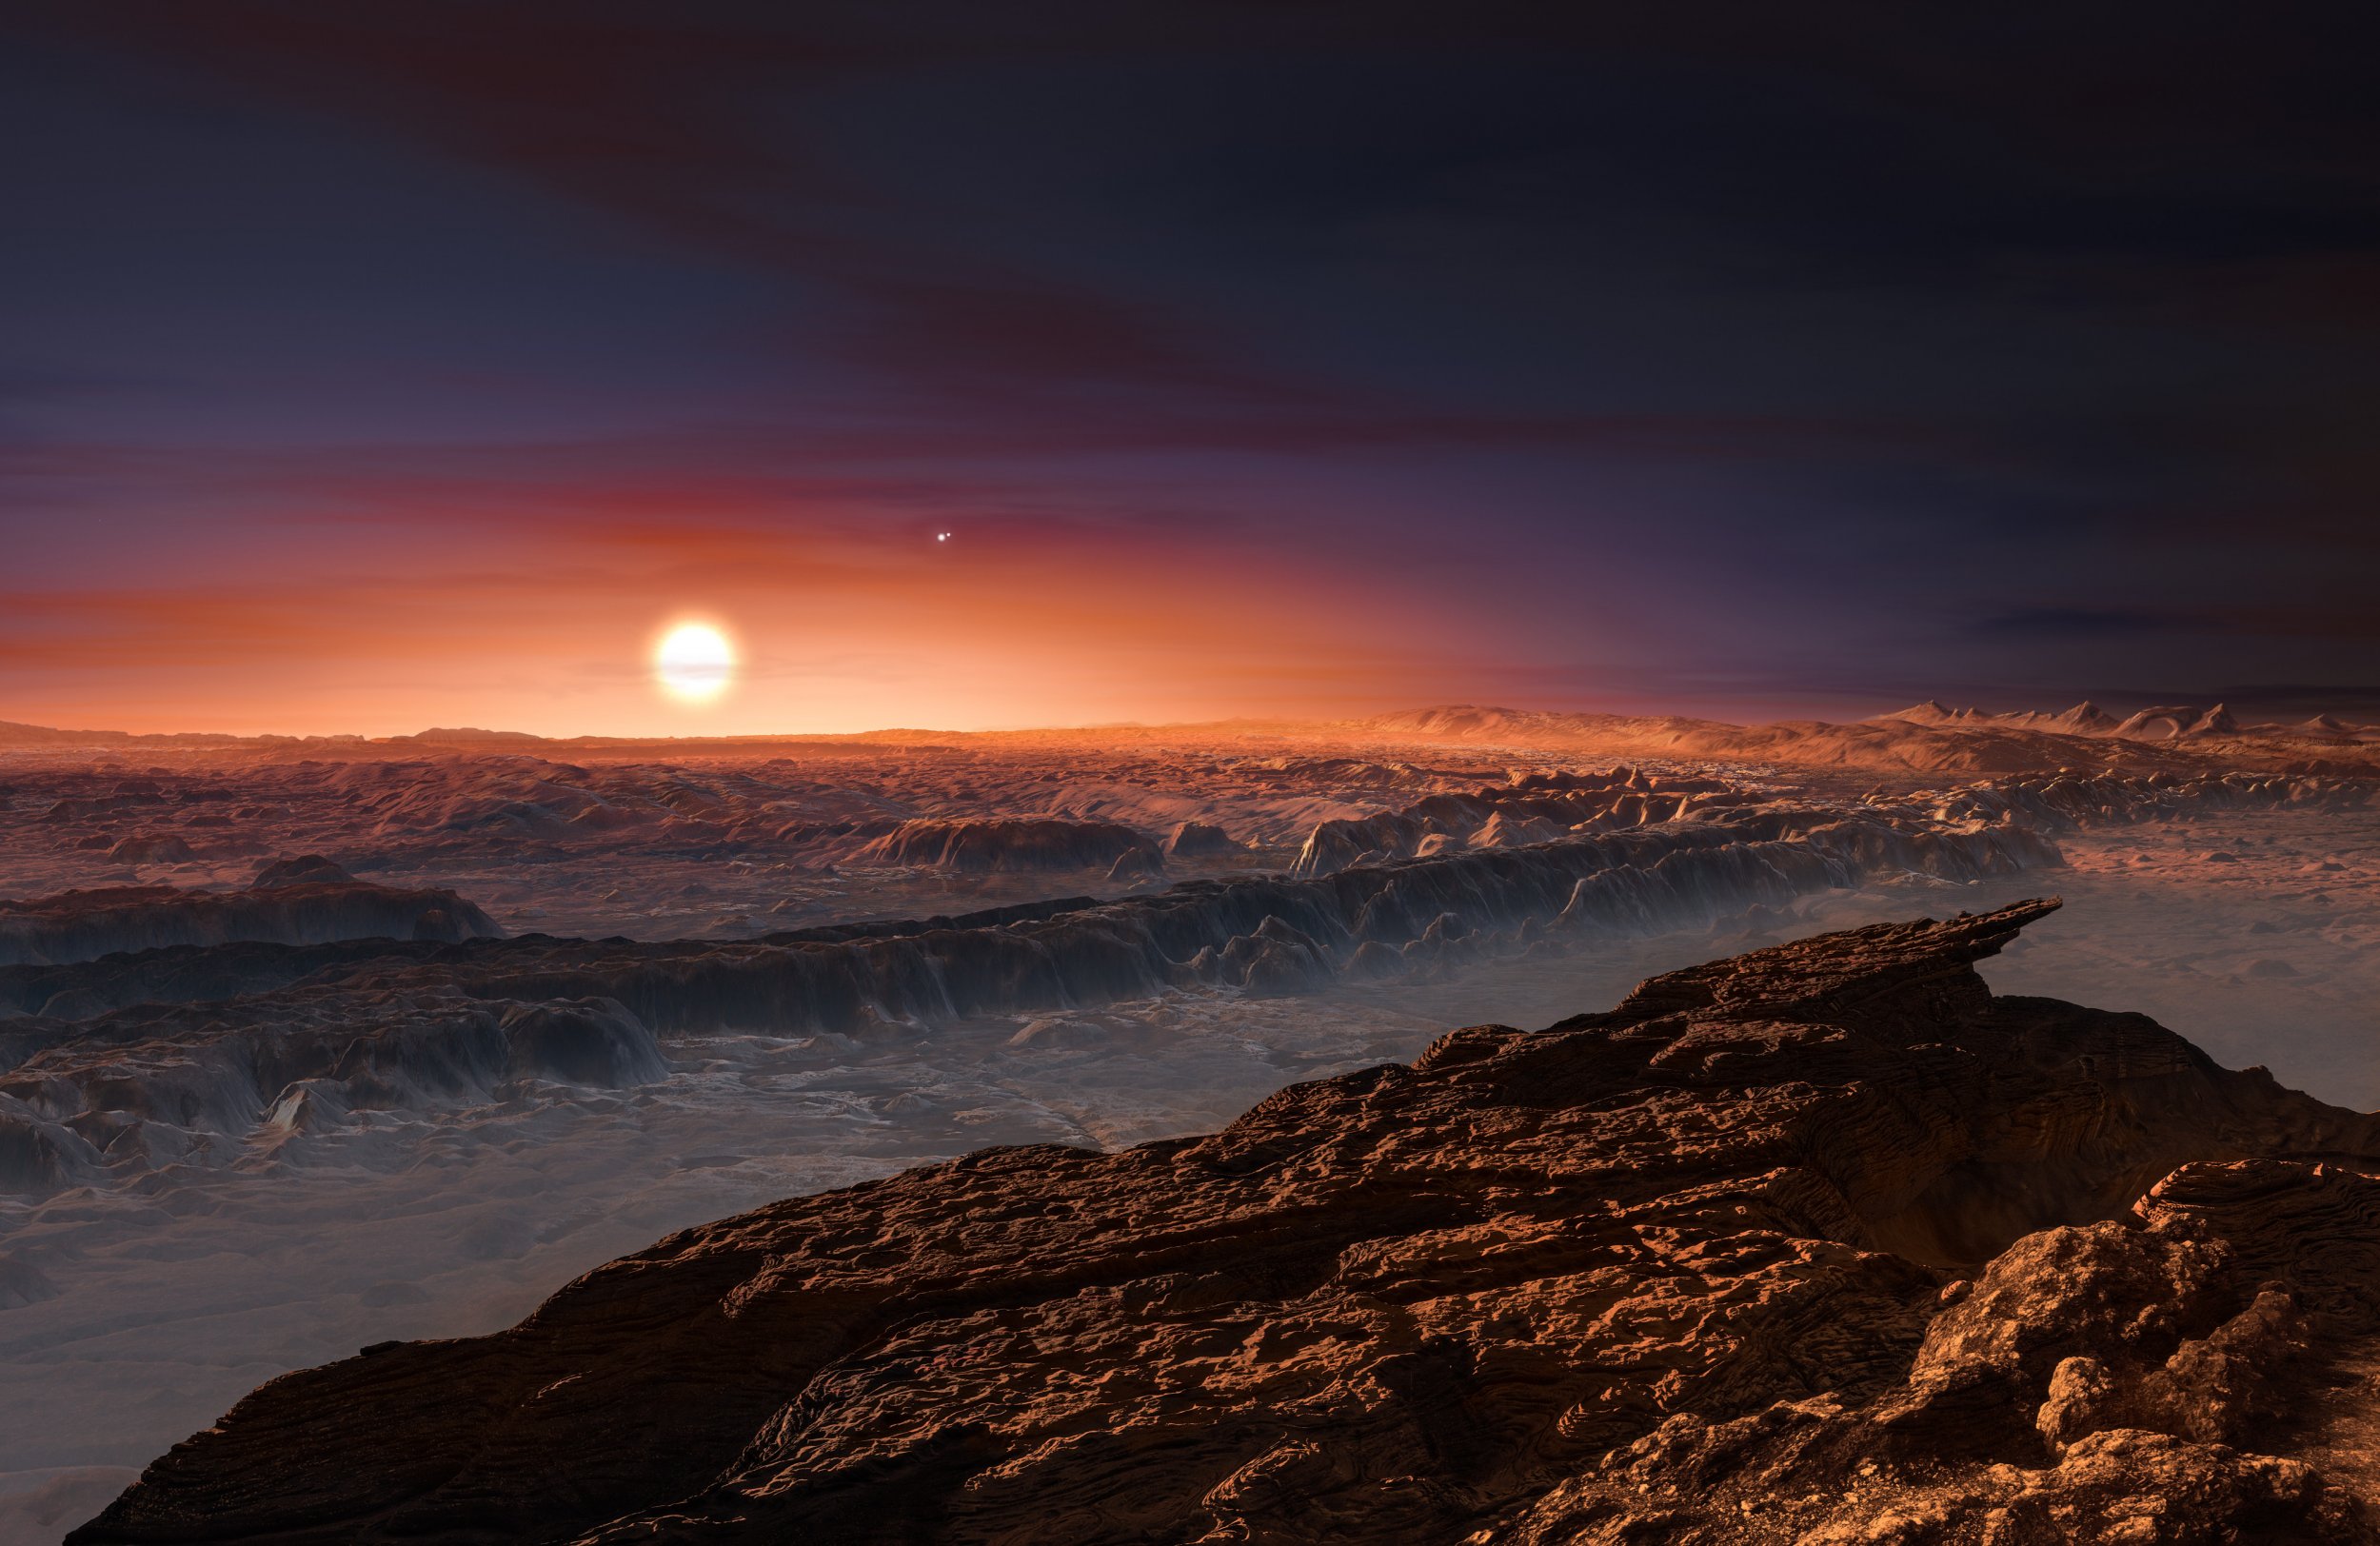 Artist's impression of the Proxima Centauri system from the point of view of an exoplanet within. Credit: ESO / M. Kornmesser